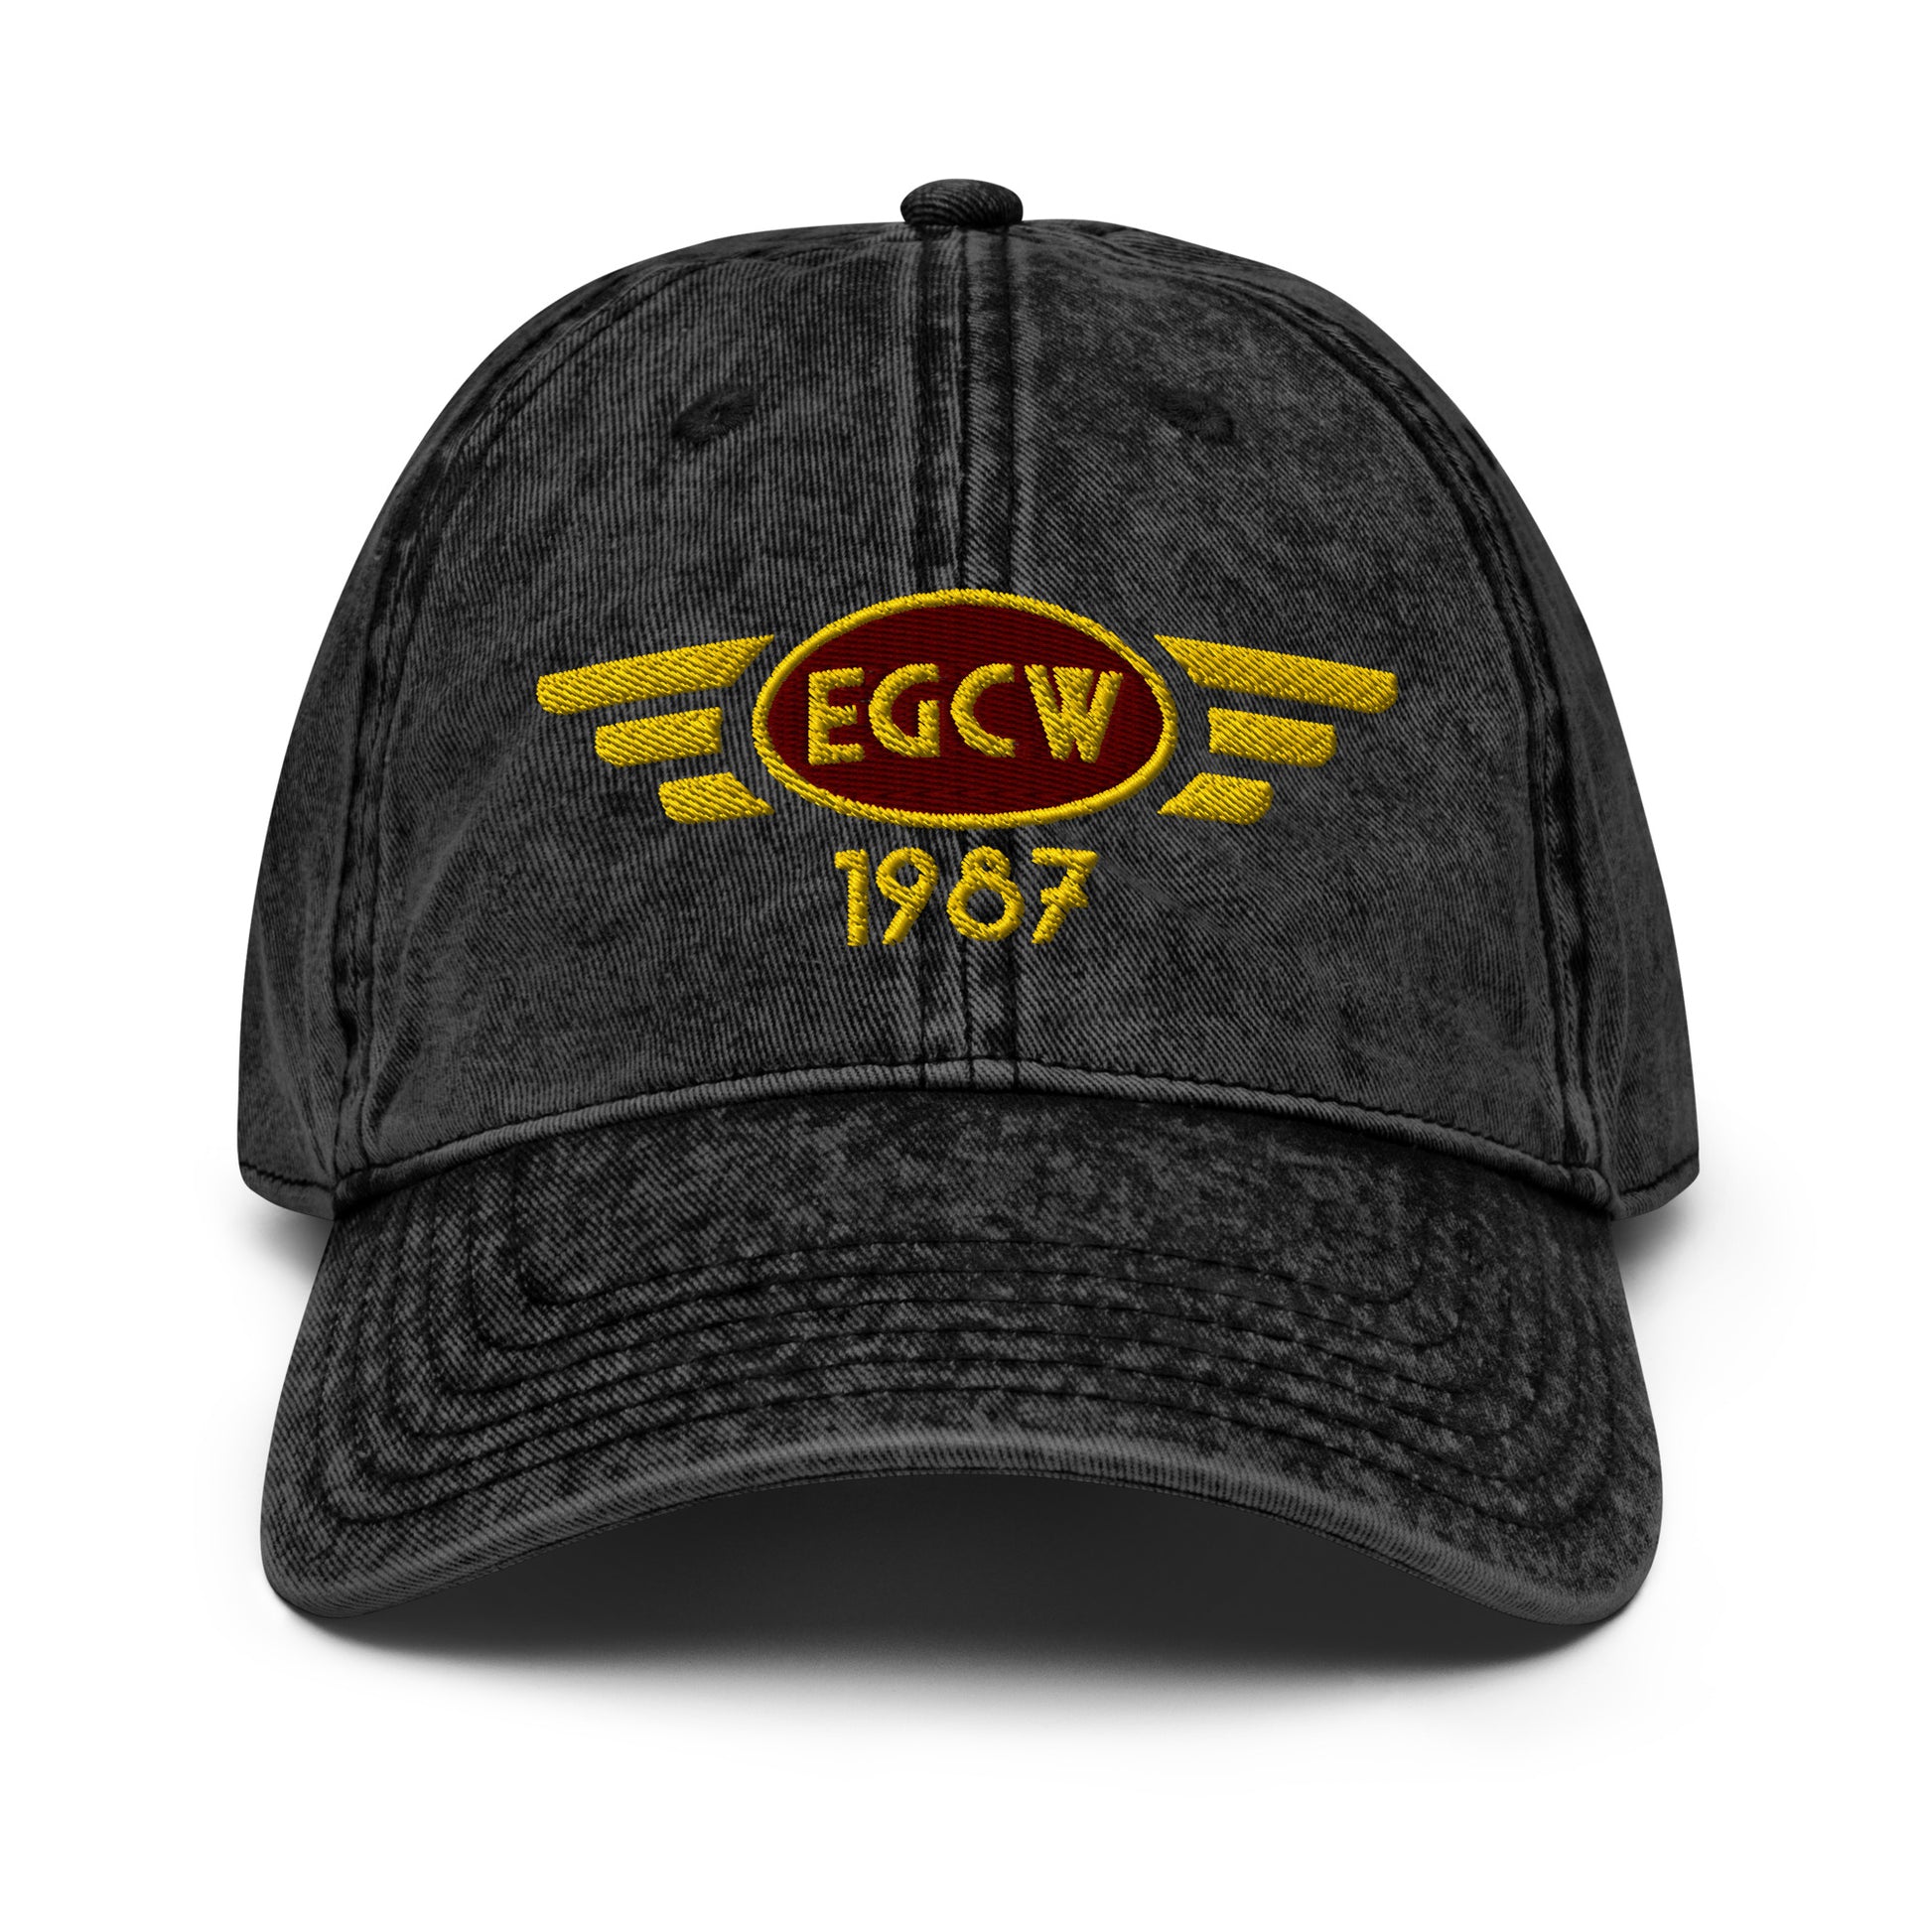 Black cotton twill baseball cap with embroidered vintage style aviation logo for Welshpool Airport.